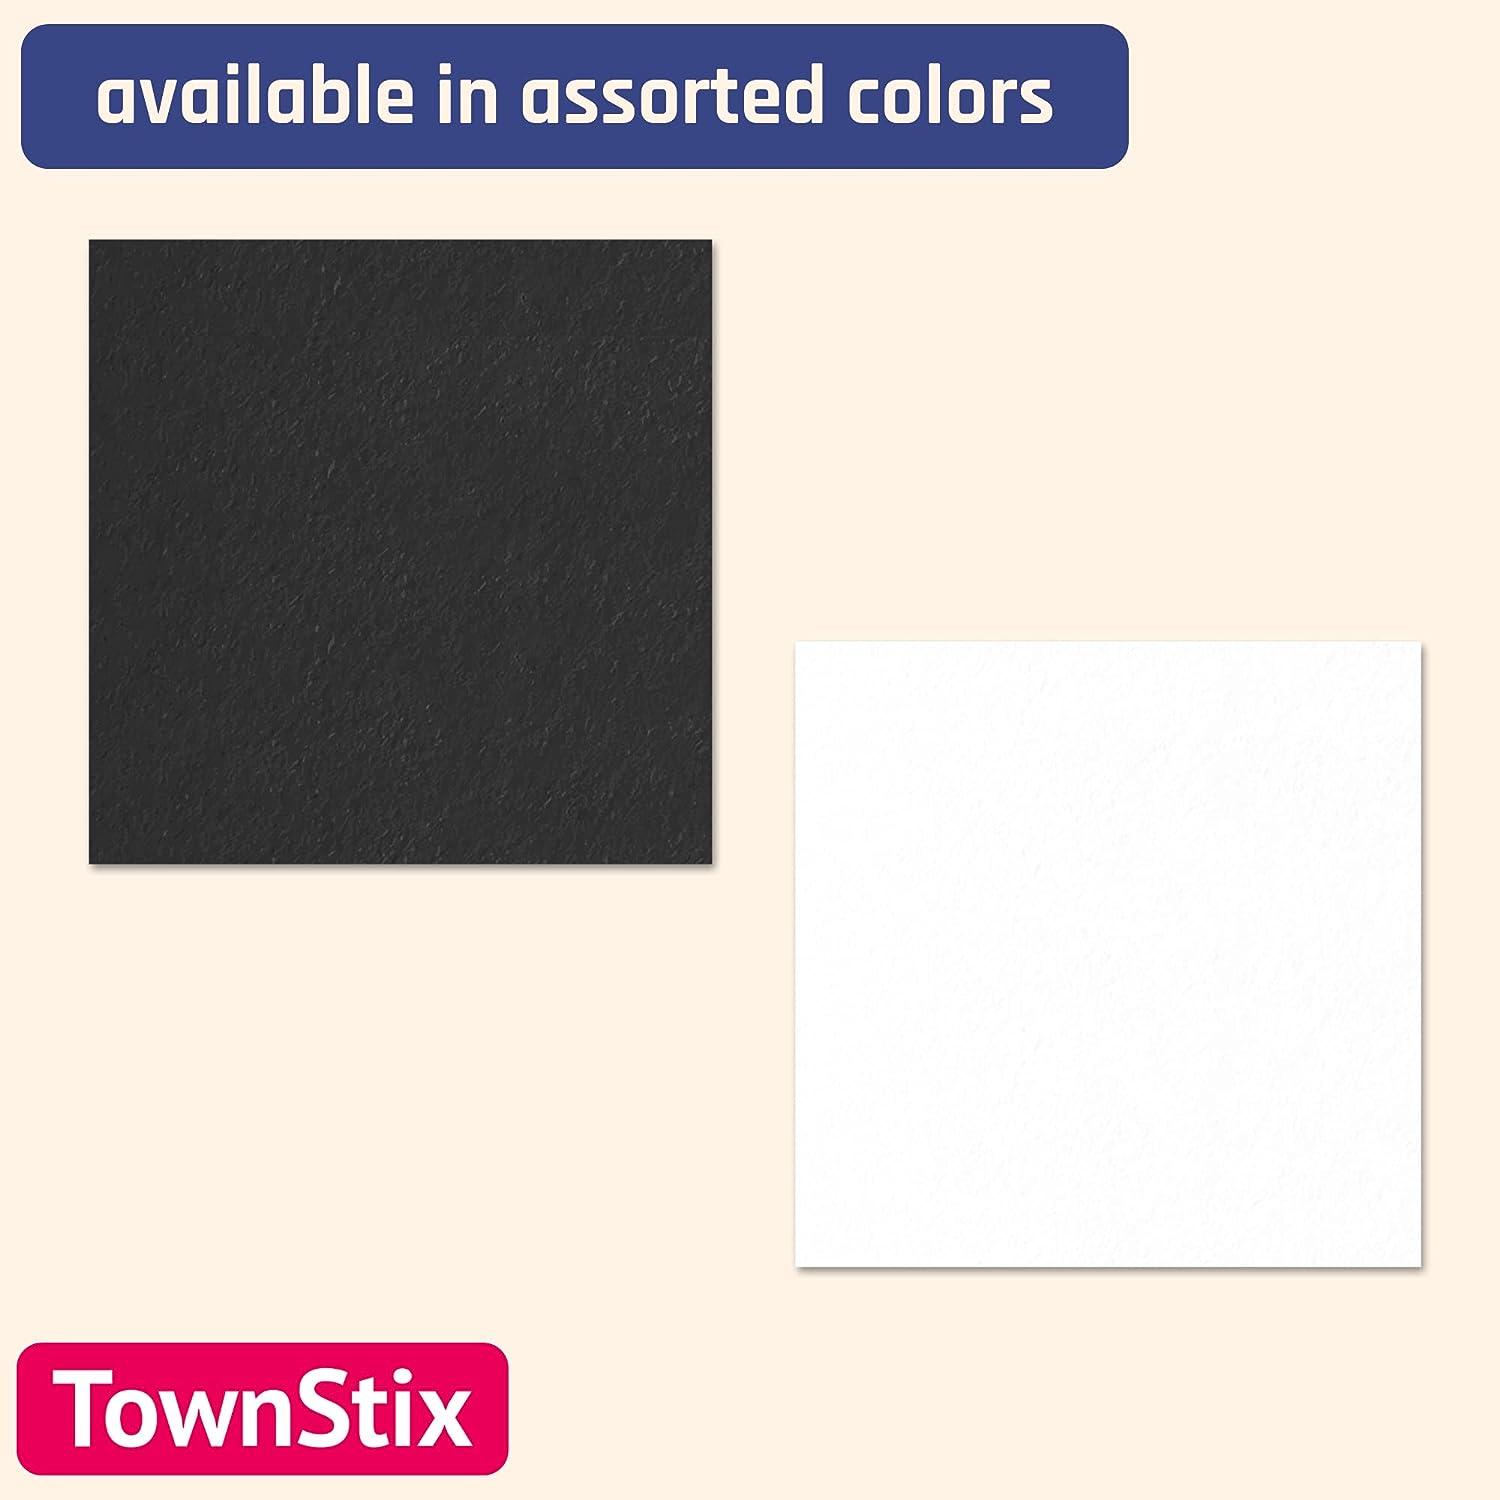 25 Sheets White Cardstock Paper Heavyweight - 110 lb. Cover 12 x 12 White  25 Sheets